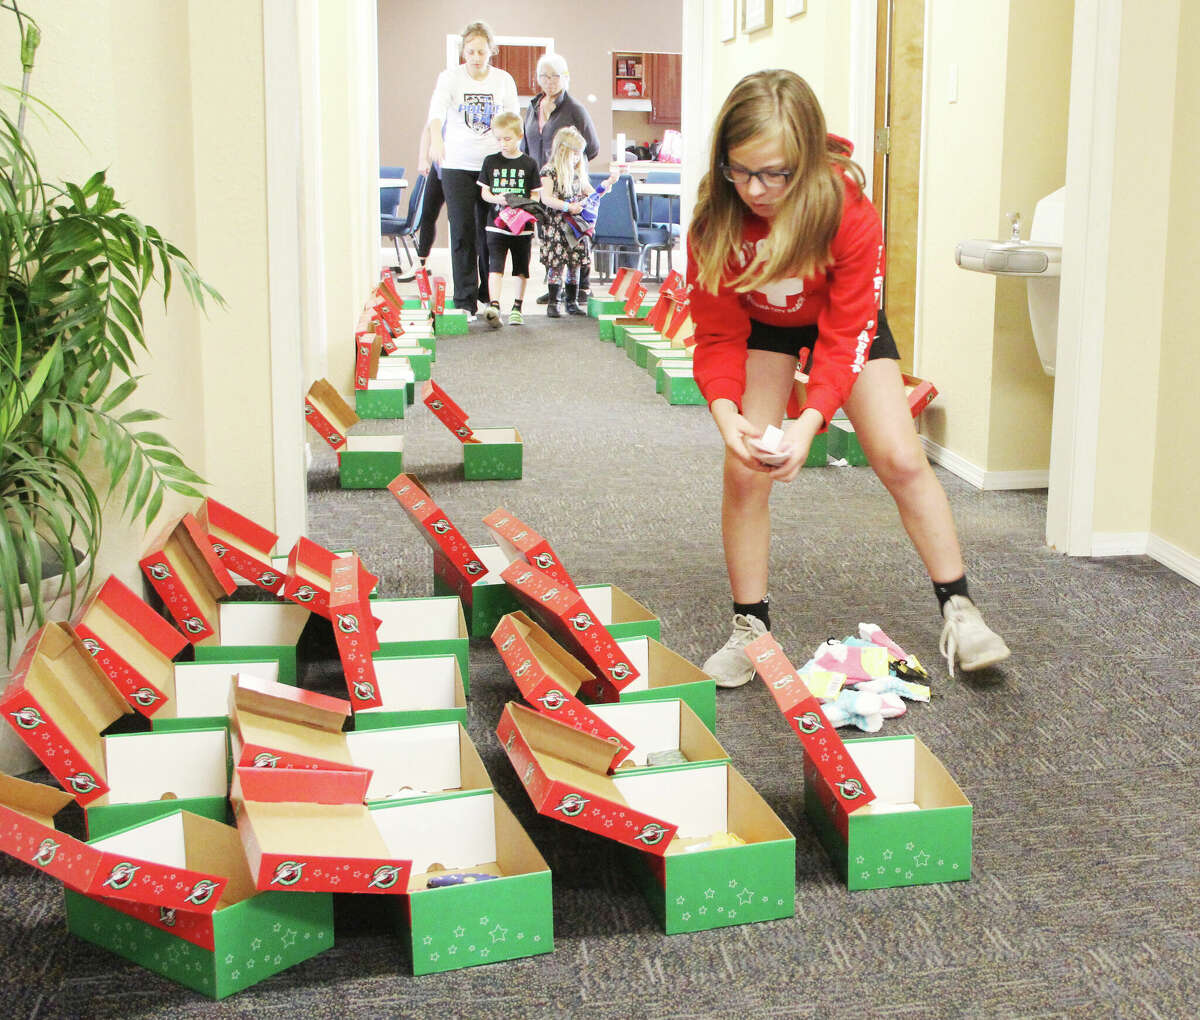 Eva Martin, 10, drops items into shoeboxes during a Samaritan's Purse Operation Christmas Child project at the Ivy Heights Church of God in Wood River Saturday. Shoeboxes are filled with toys, small articles of clothing, school supplies and other items, then shipped to needy children throughout the world.